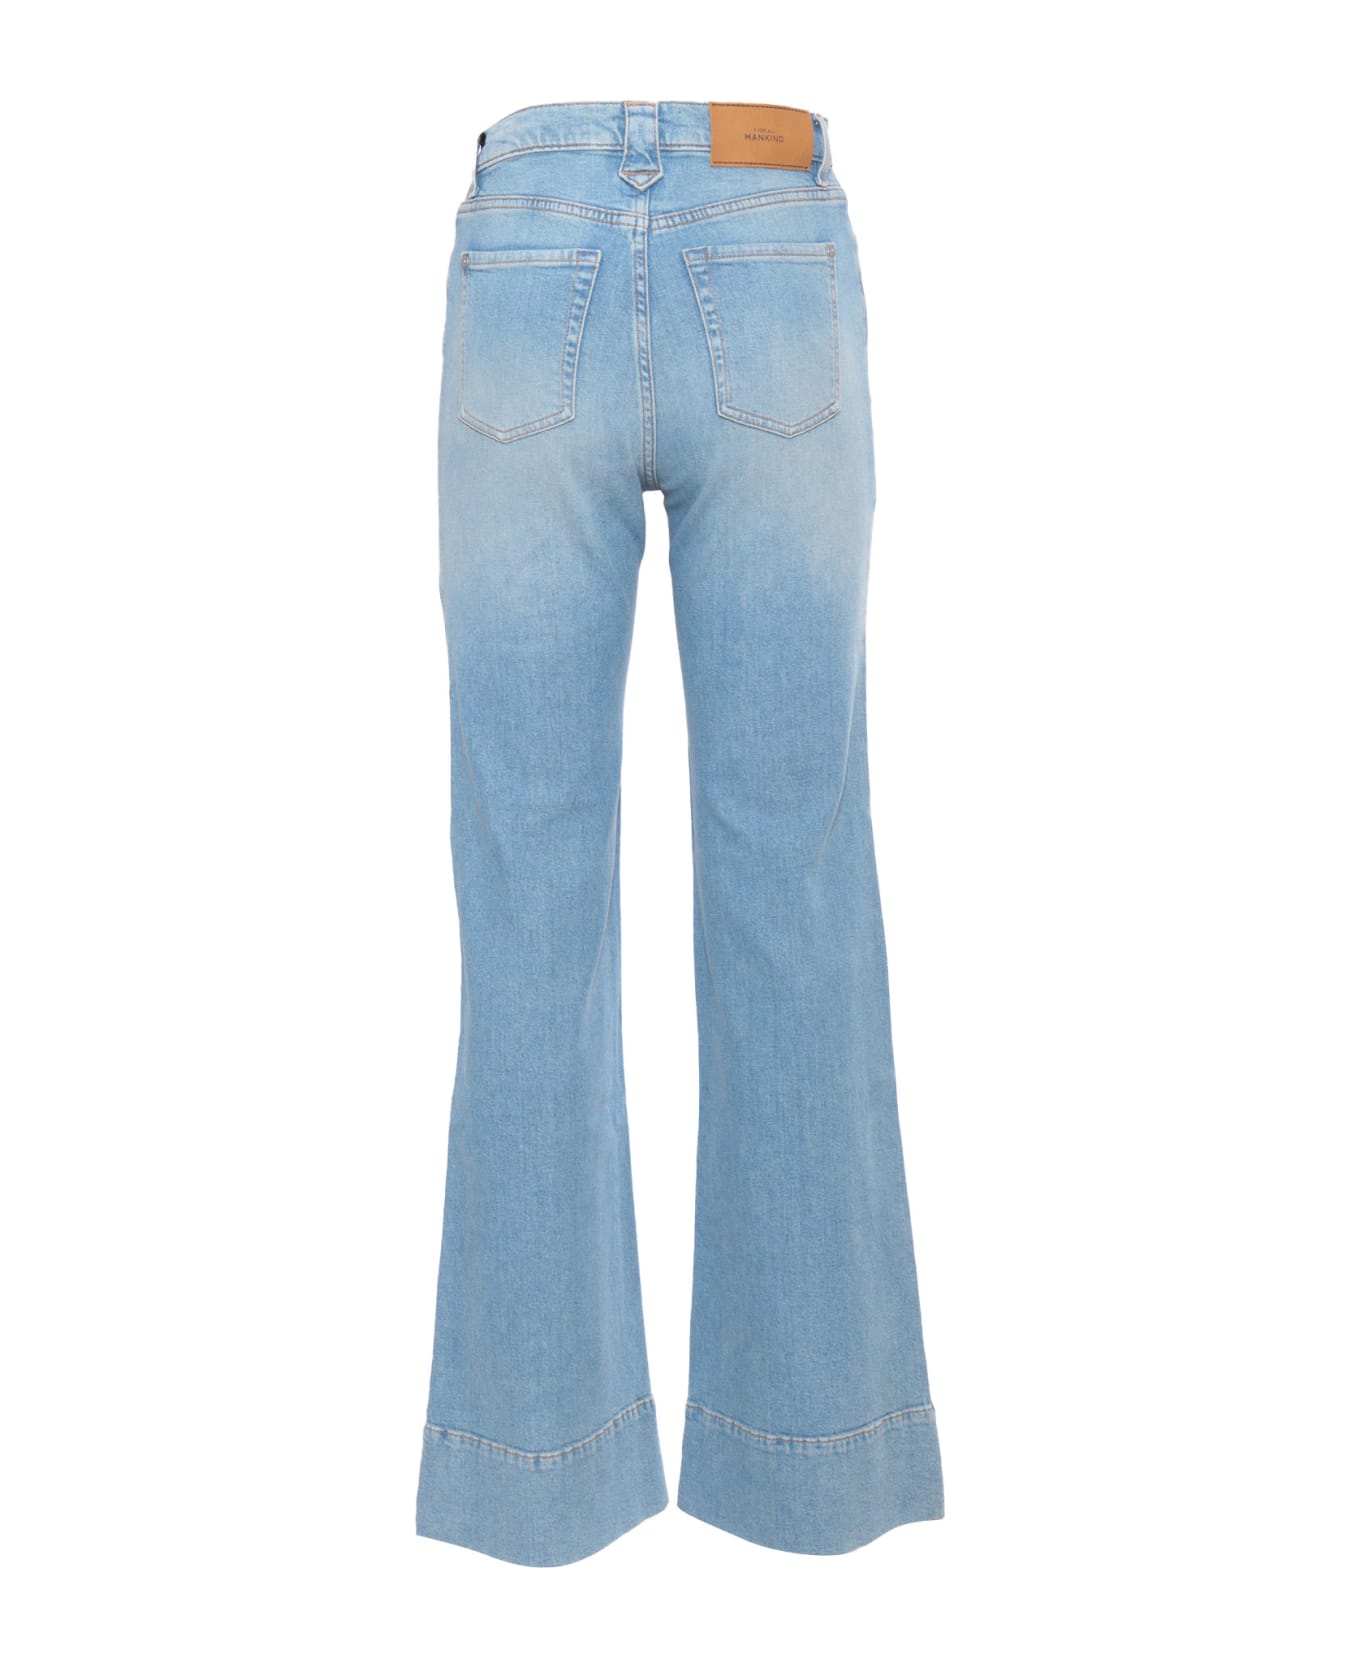 7 For All Mankind Women's Flared Jeans - BLUE